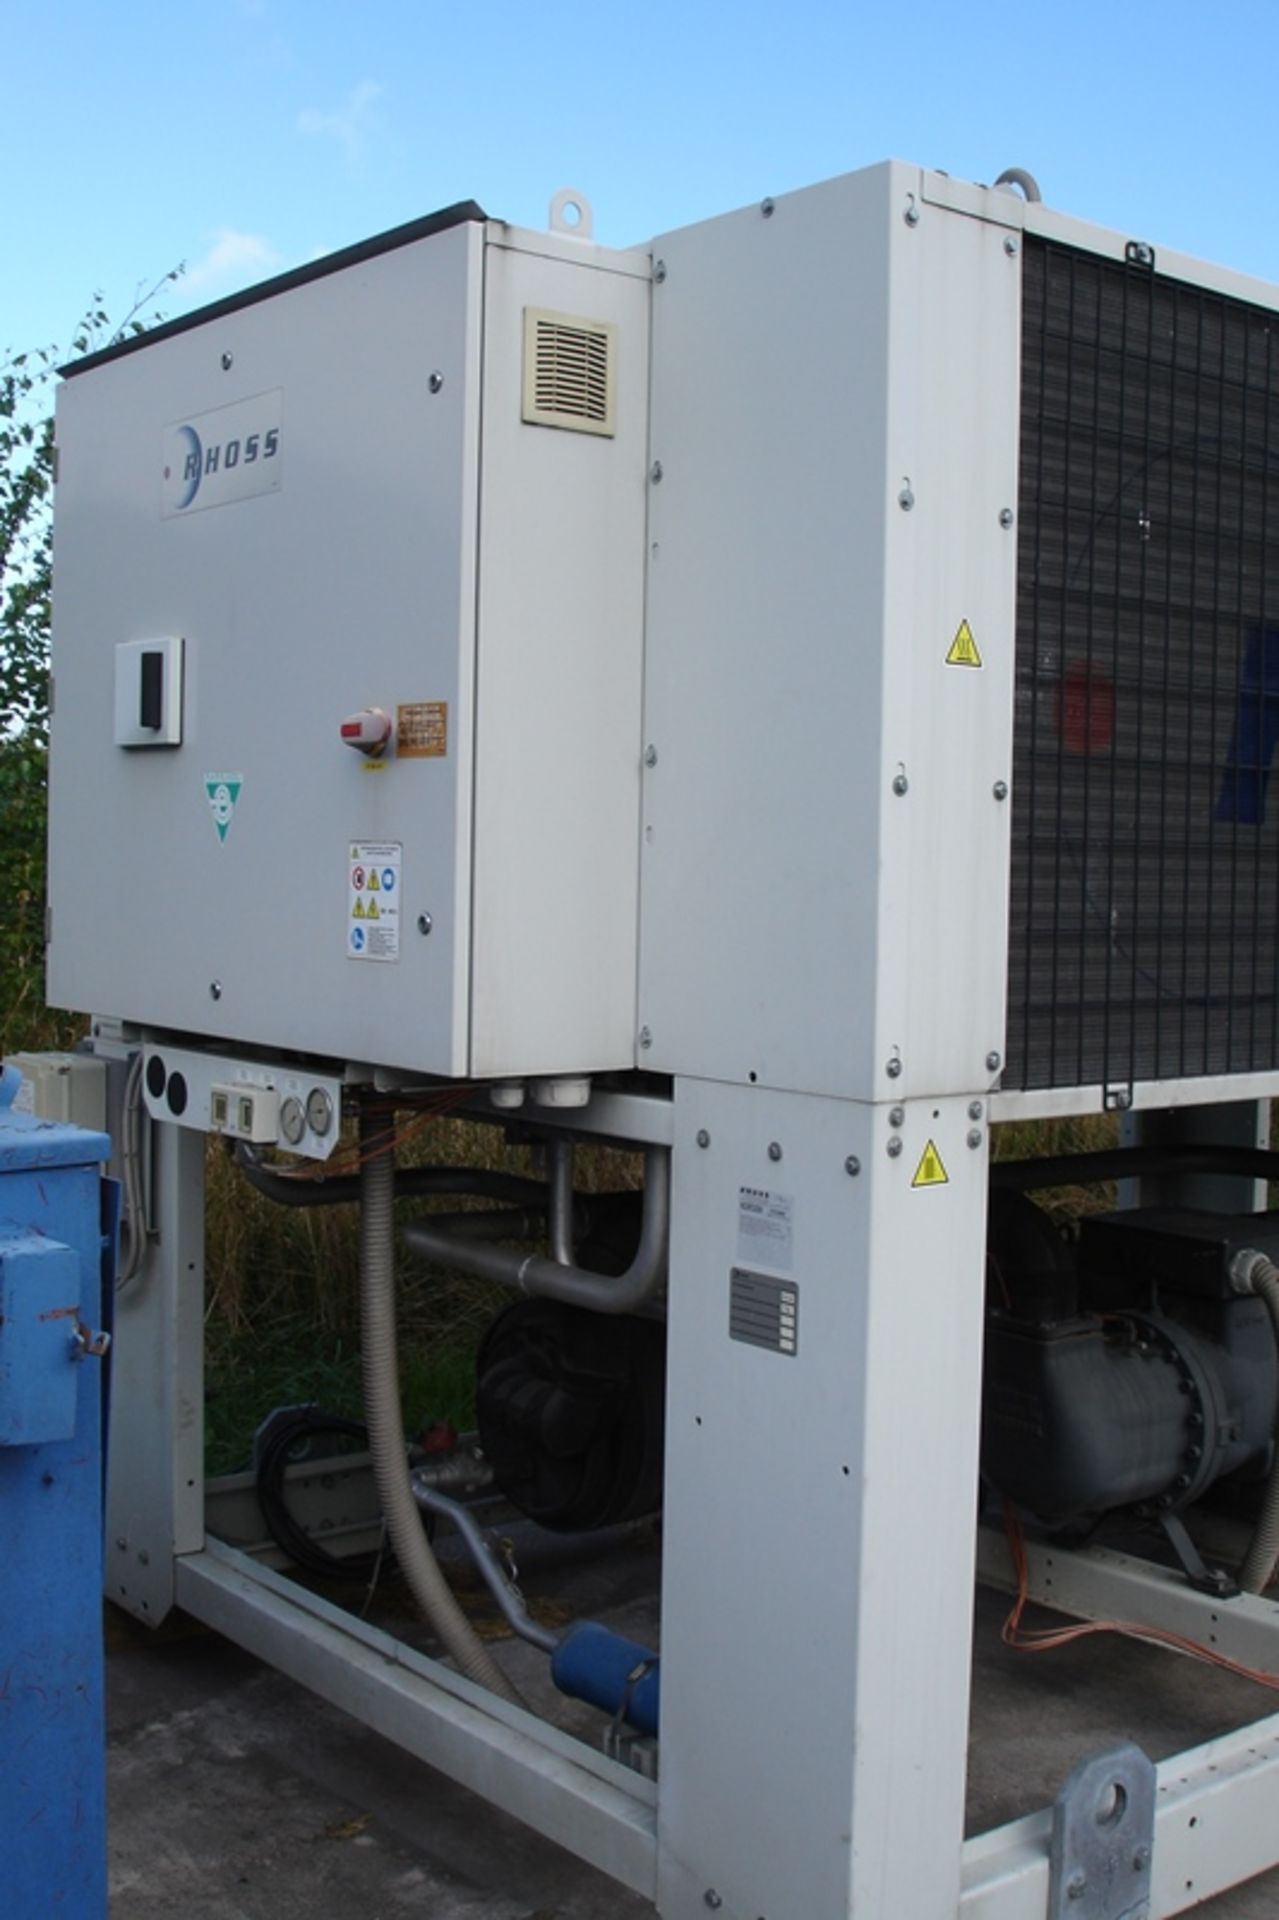 RHOSS Large Industrial Chiller - Image 2 of 8